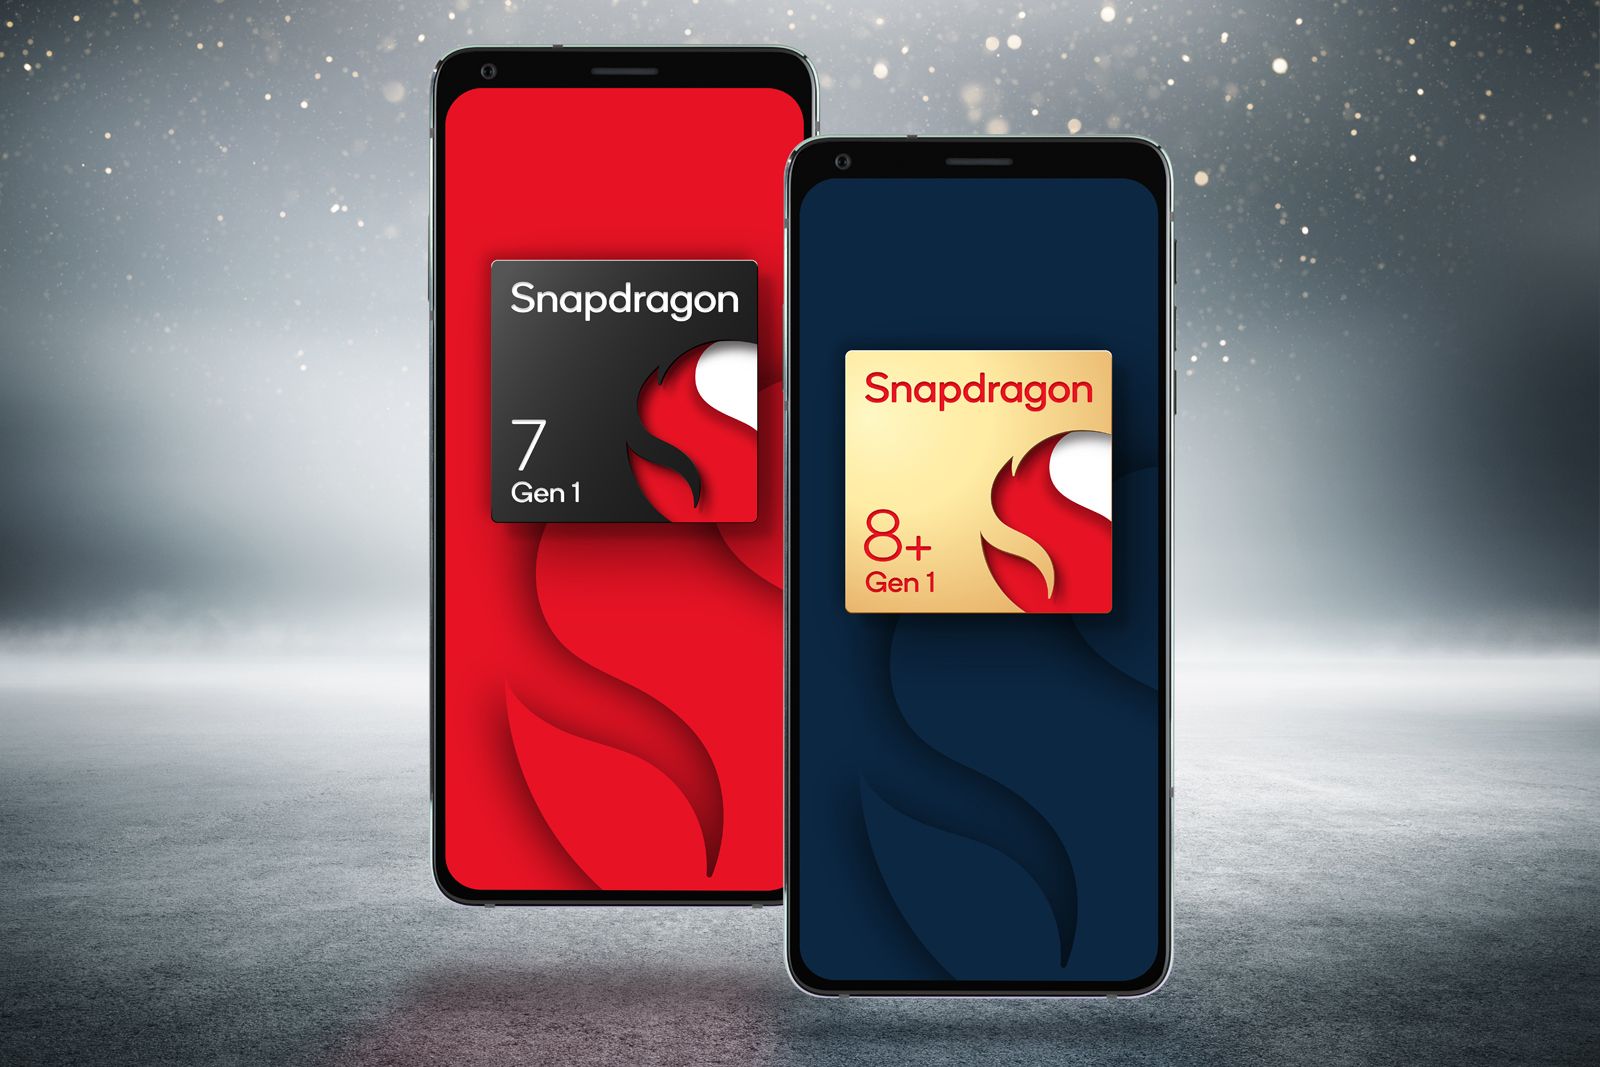 Snapdragon 7 Gen 1 will power affordable mid-range devices through 2022 photo 1